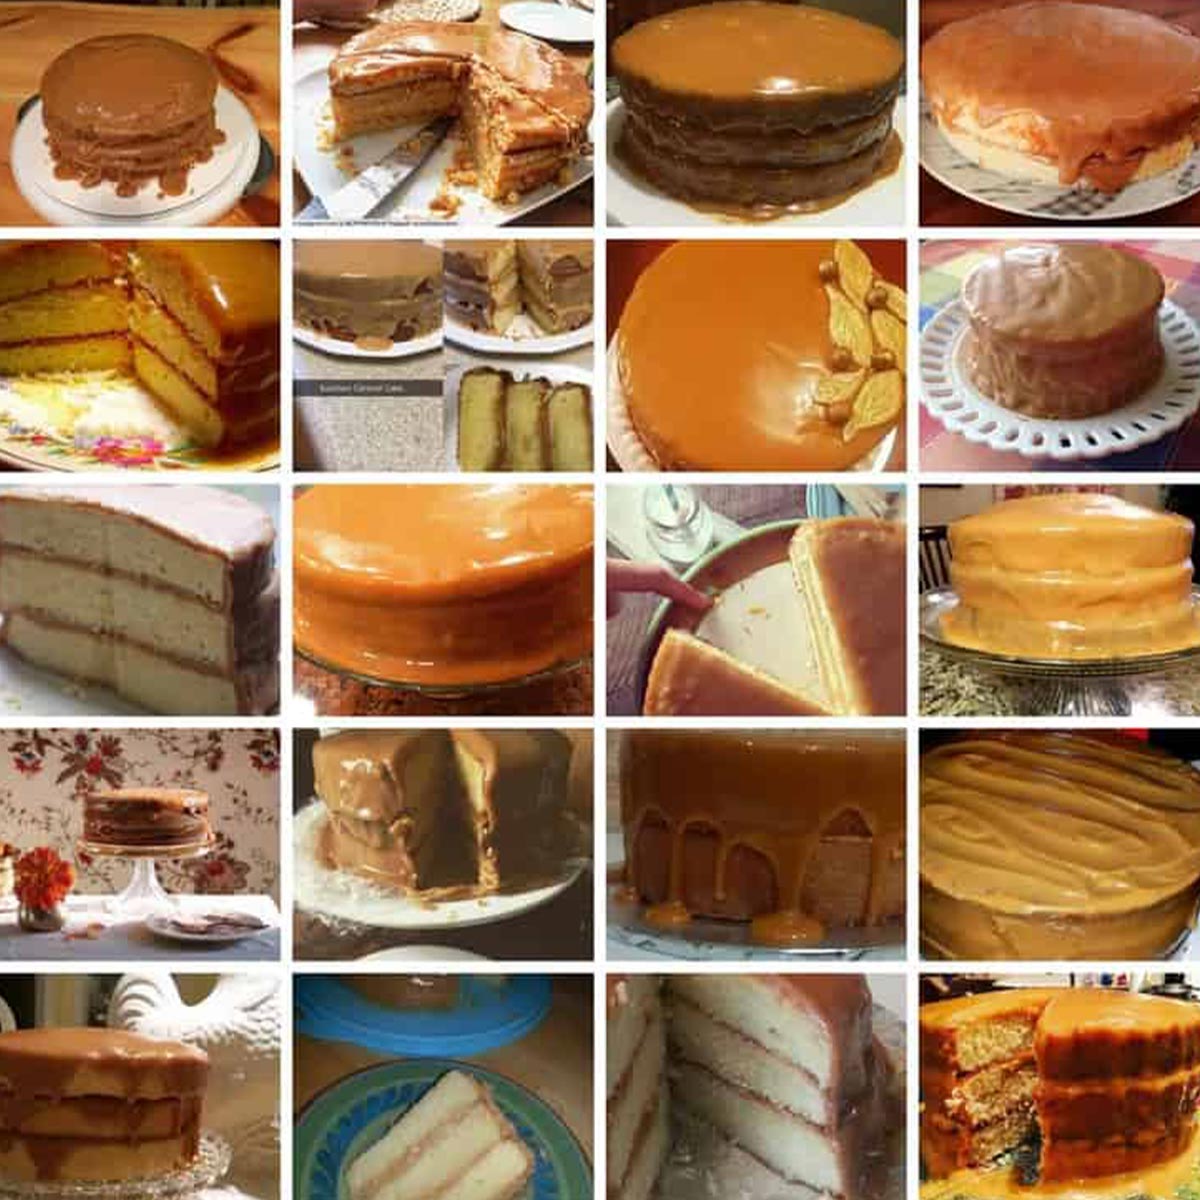 Images of readers caramel cake creations.